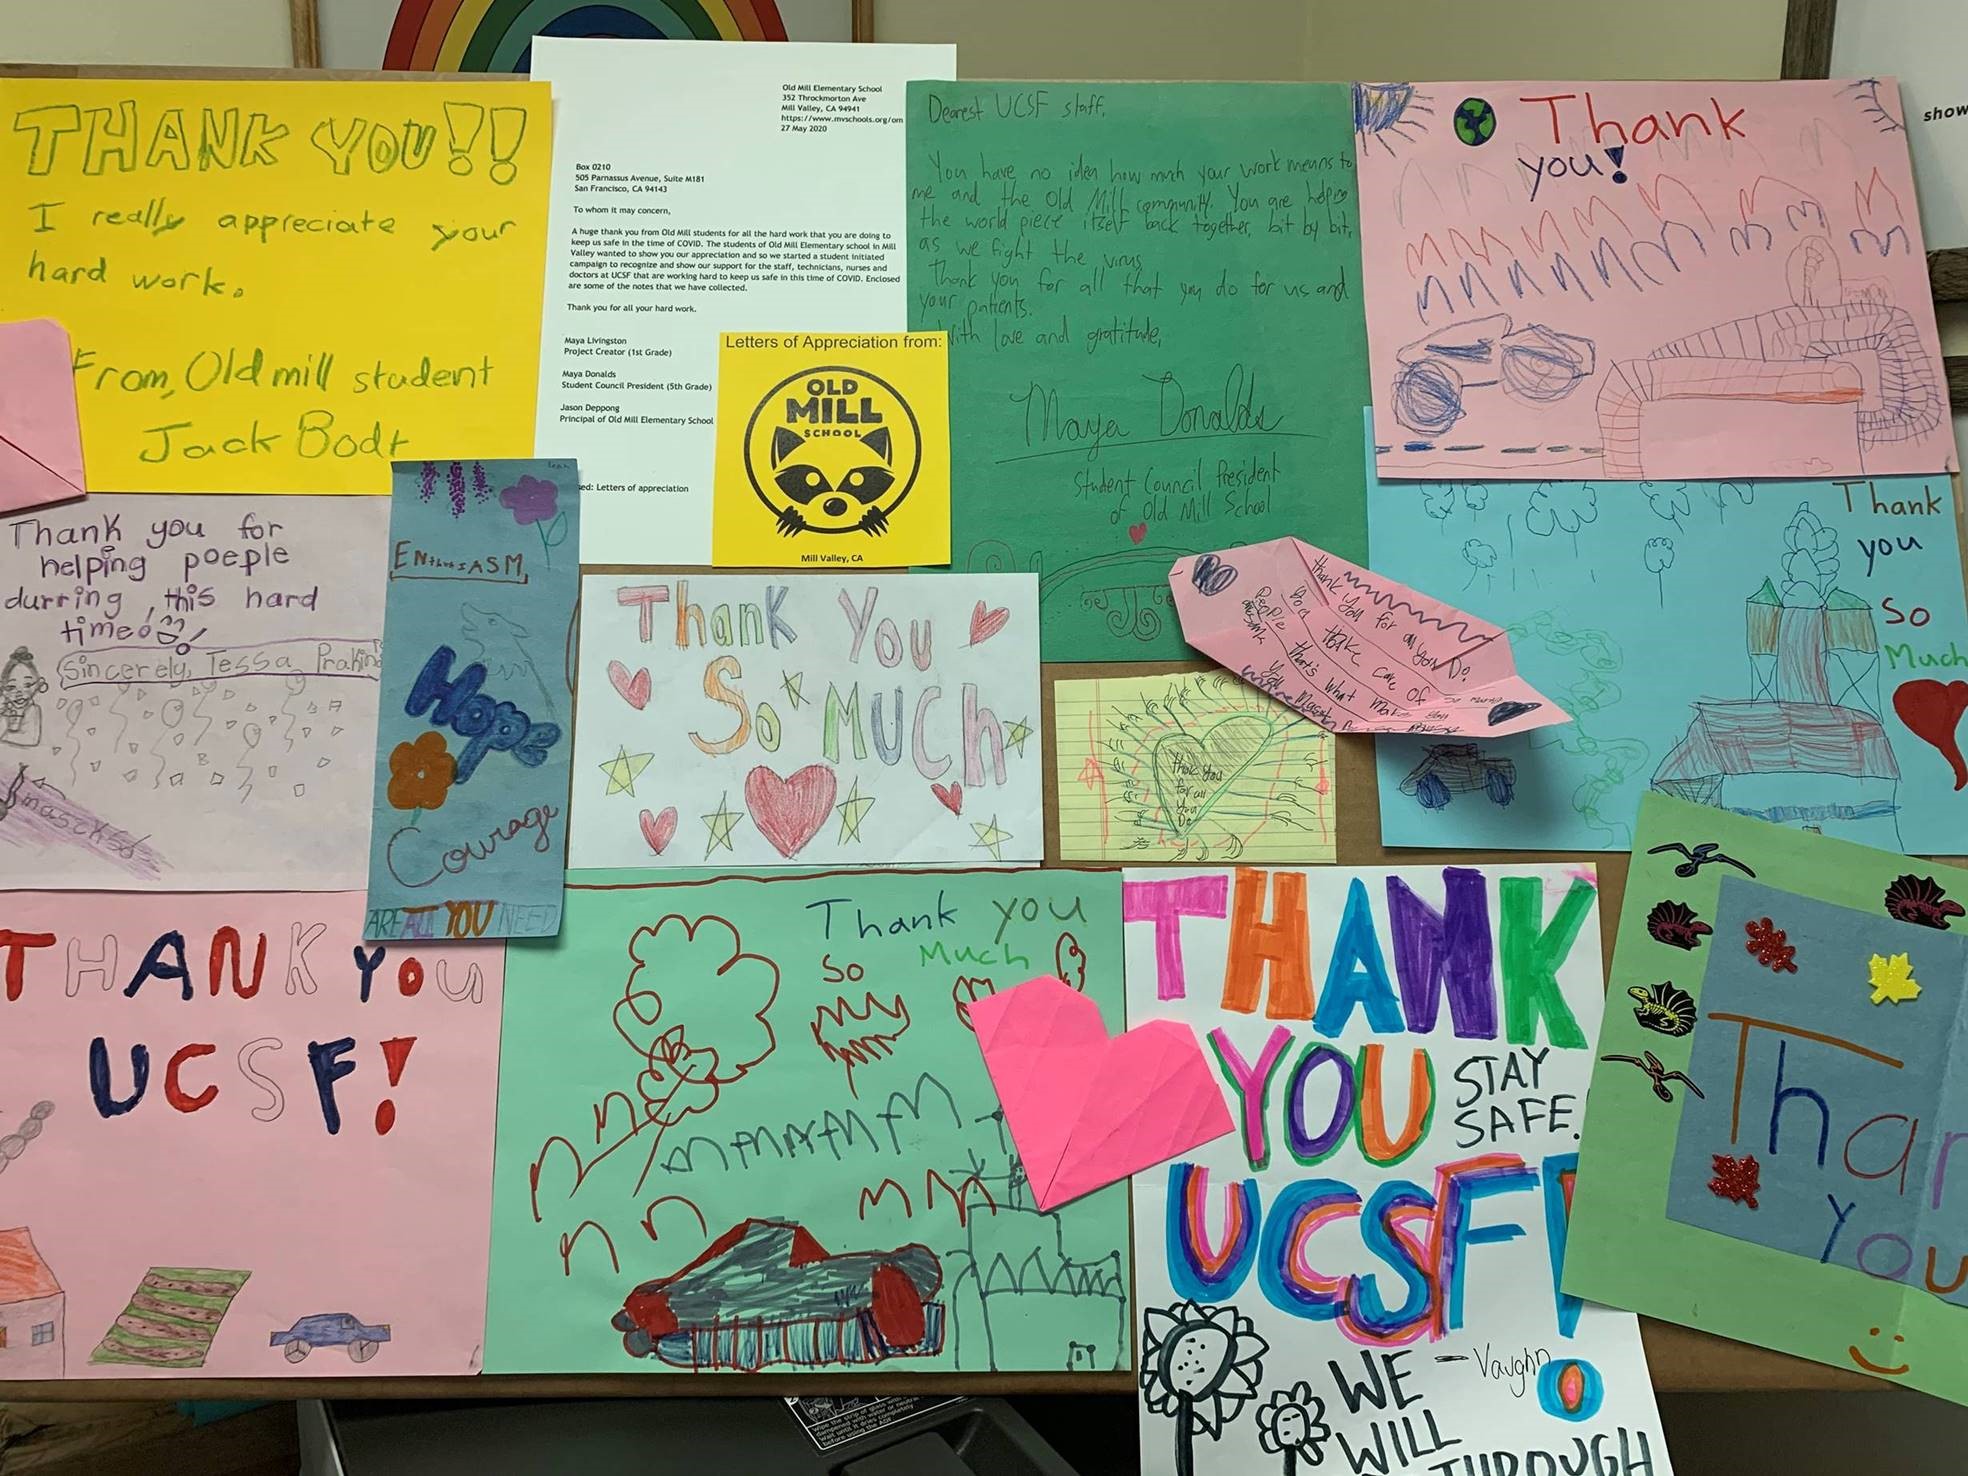 colorful thank you cards from Old Mill Elementary School students